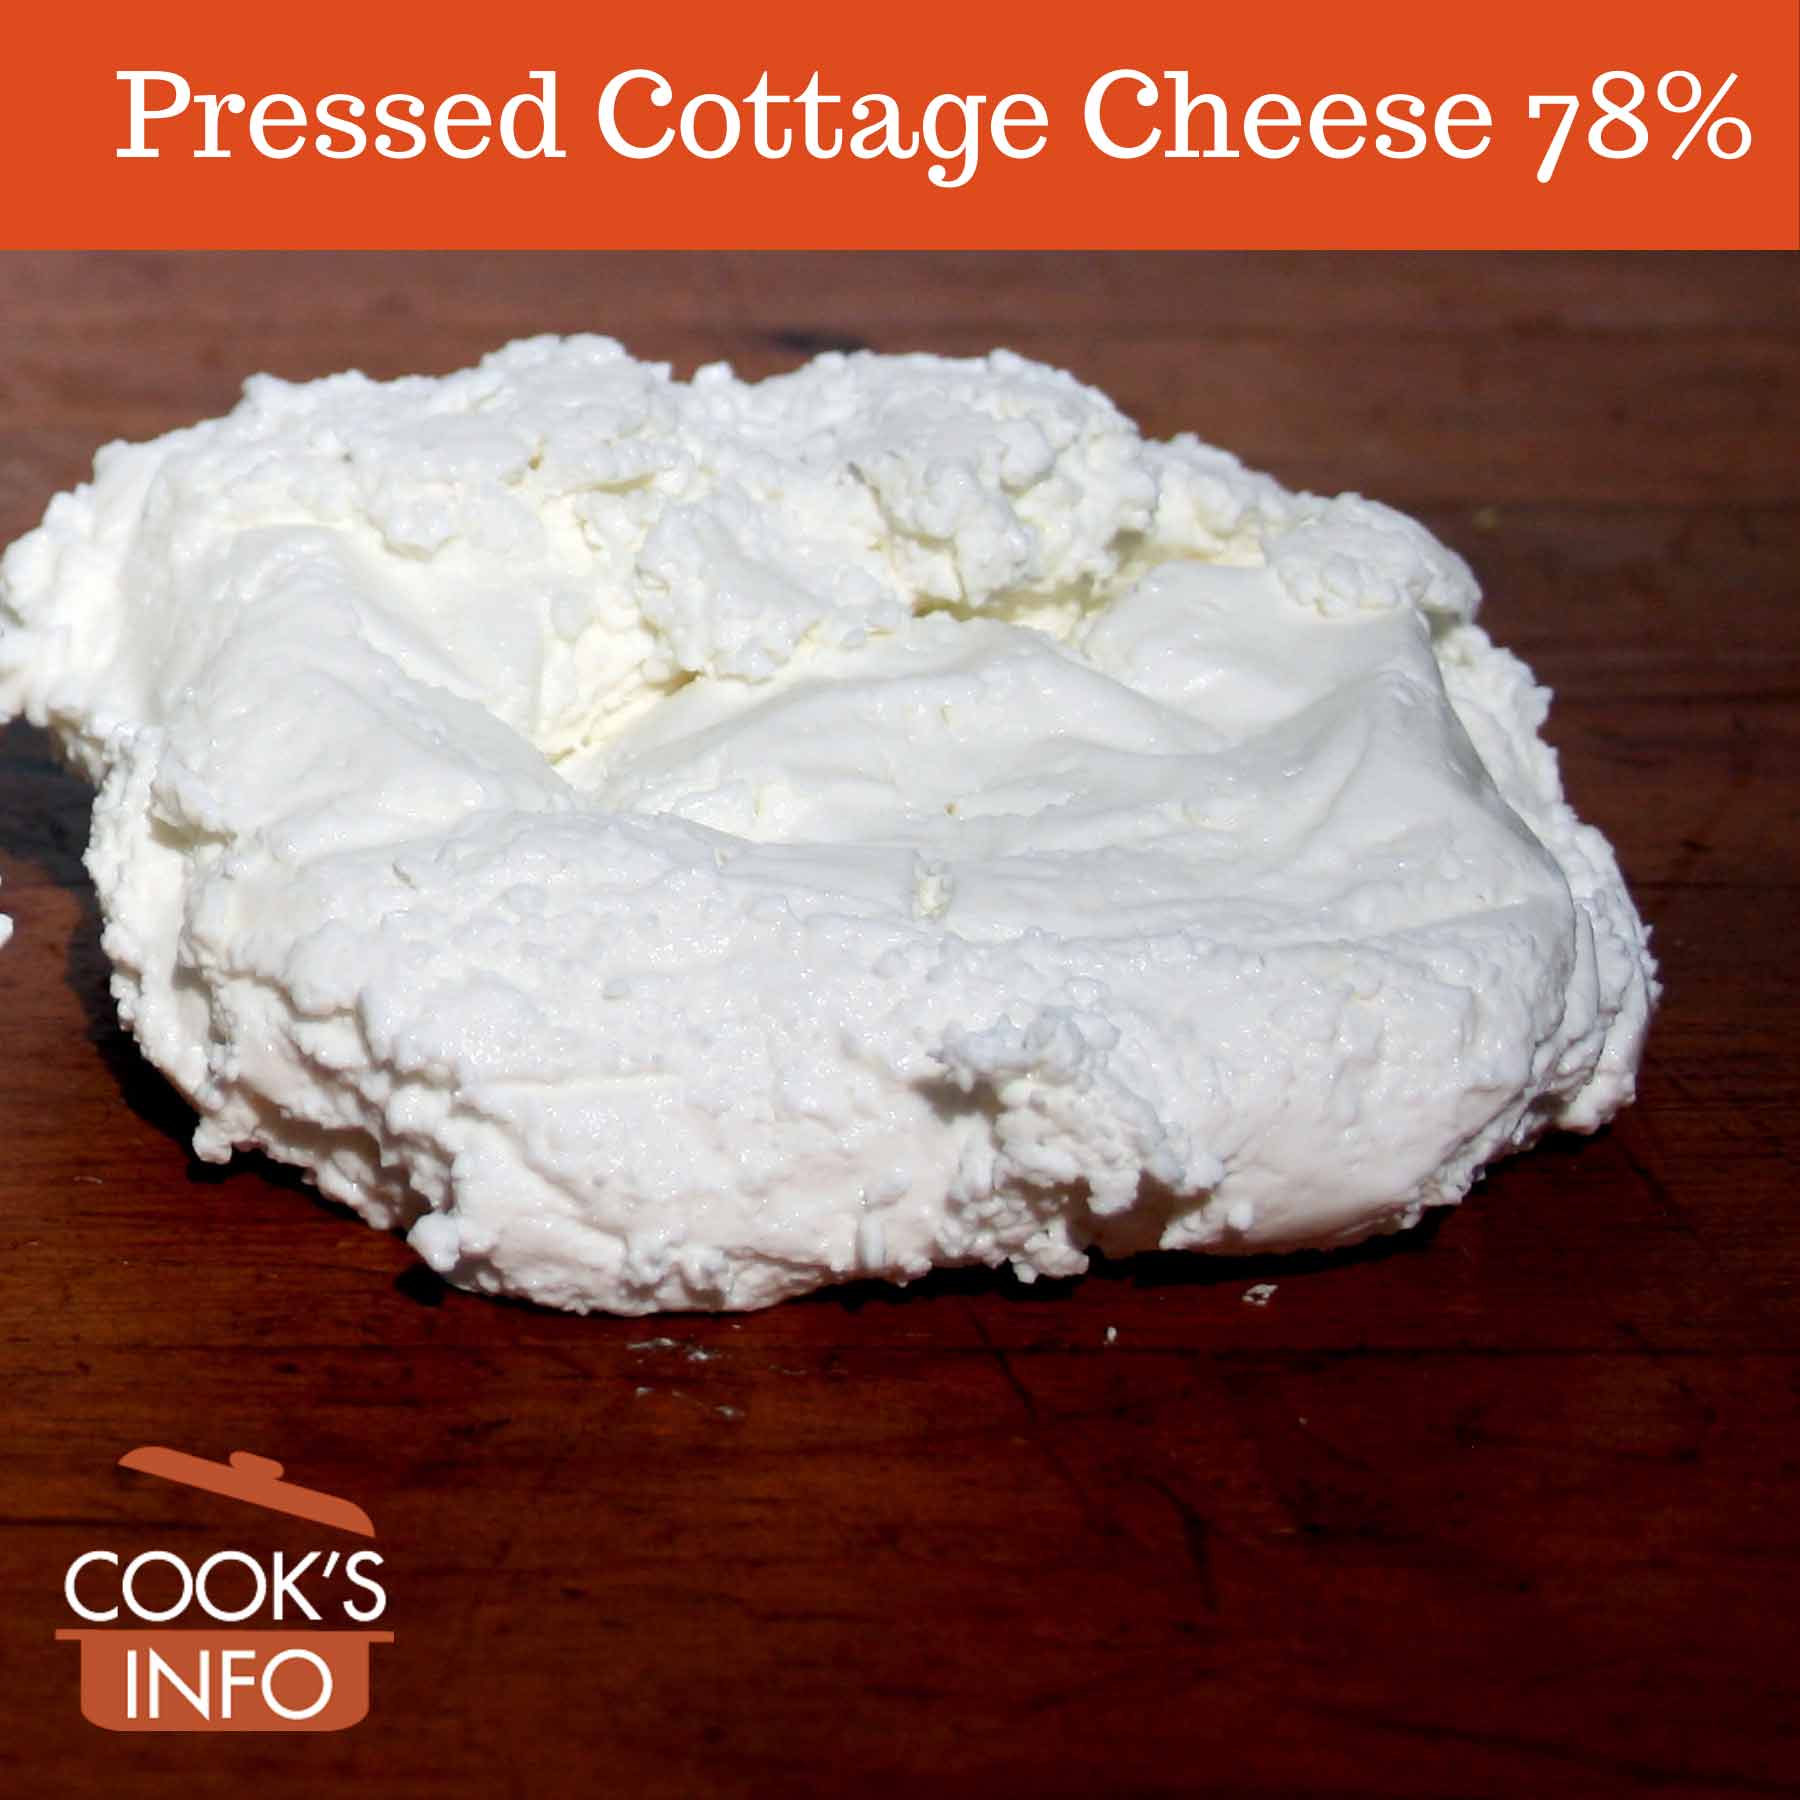 Pressed cottage cheese 78%